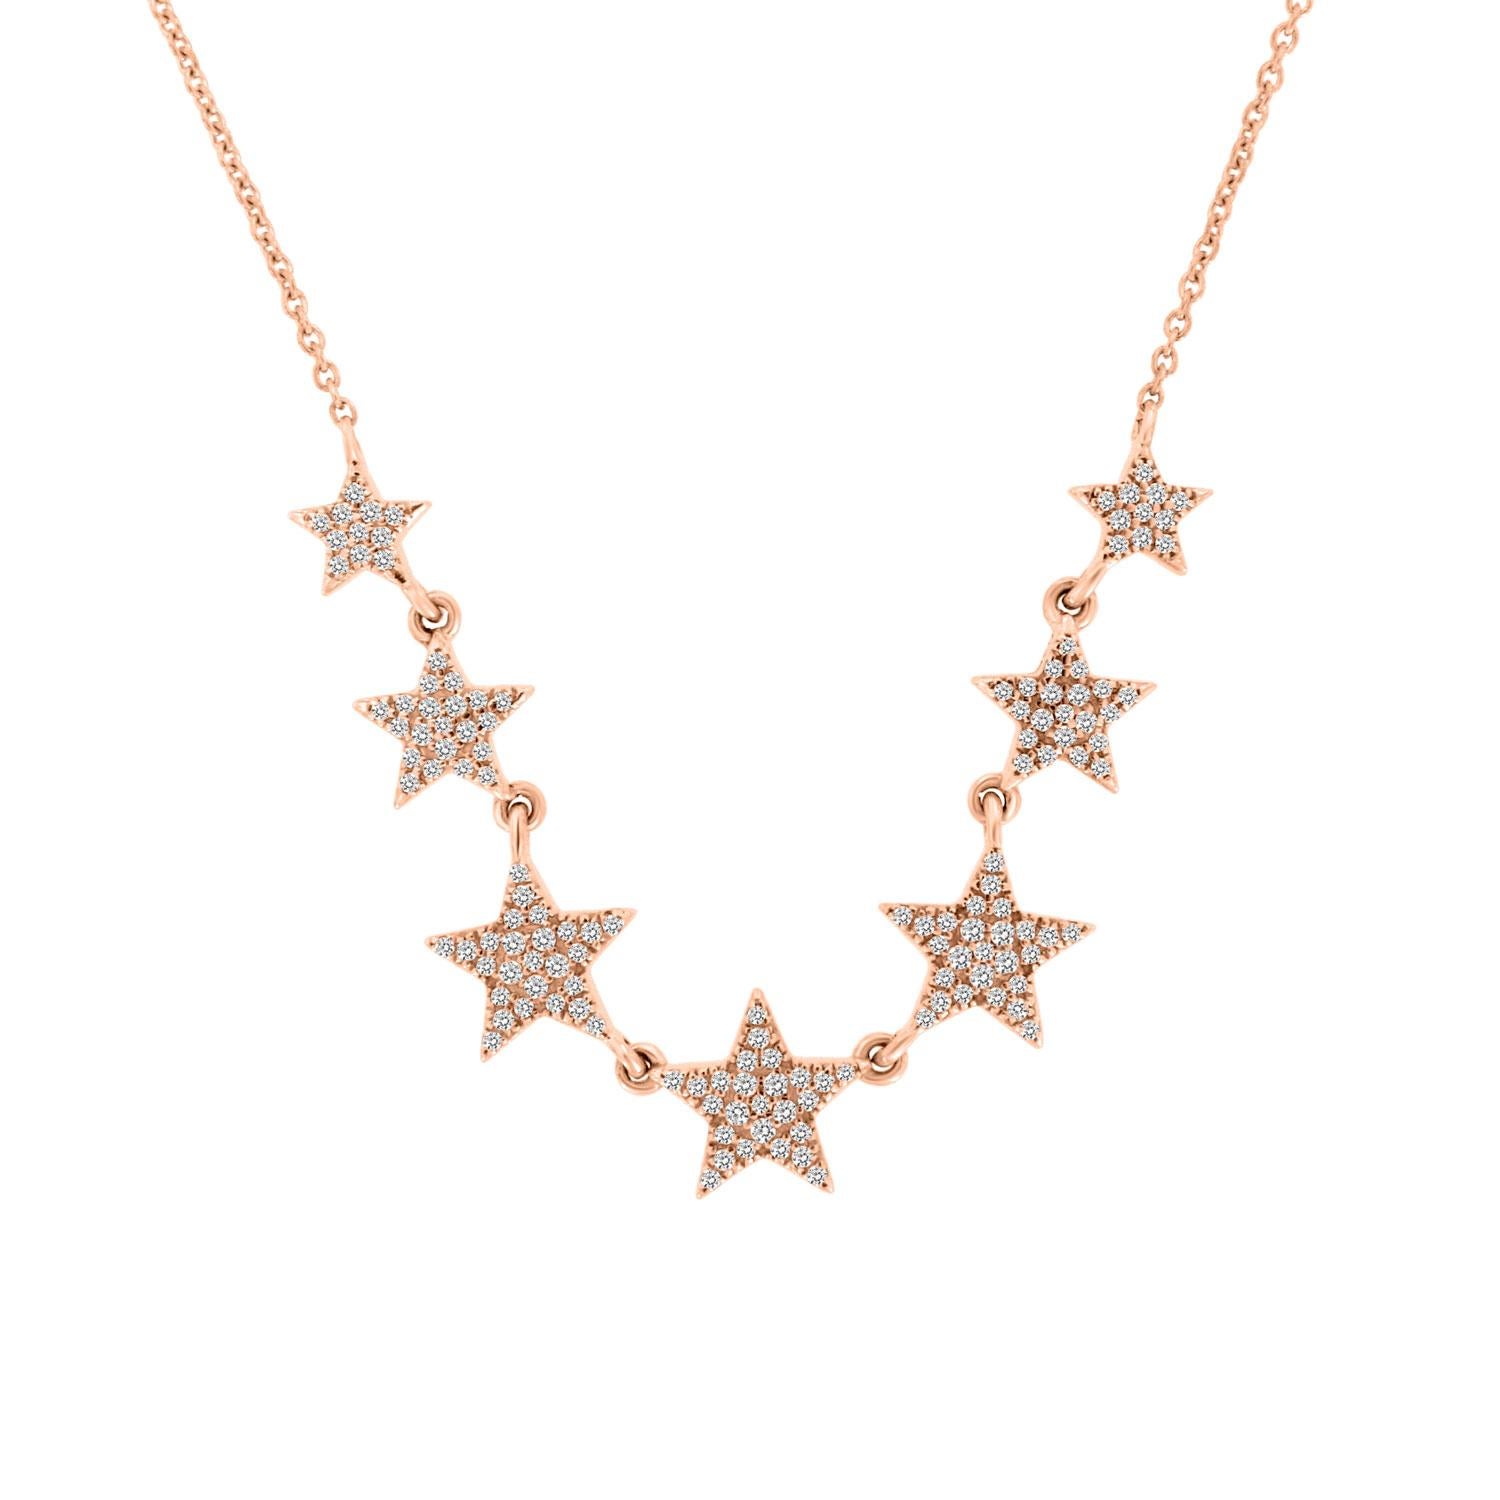 This elegant necklace features 7 diamond stars Micro Prong-set linked to each other via delicate loops. Experience The Difference in Person!

Product details: 

Center Gemstone Type: NATURAL DIAMOND
Center Gemstone Shape: ROUND
Metal: 14K Rose